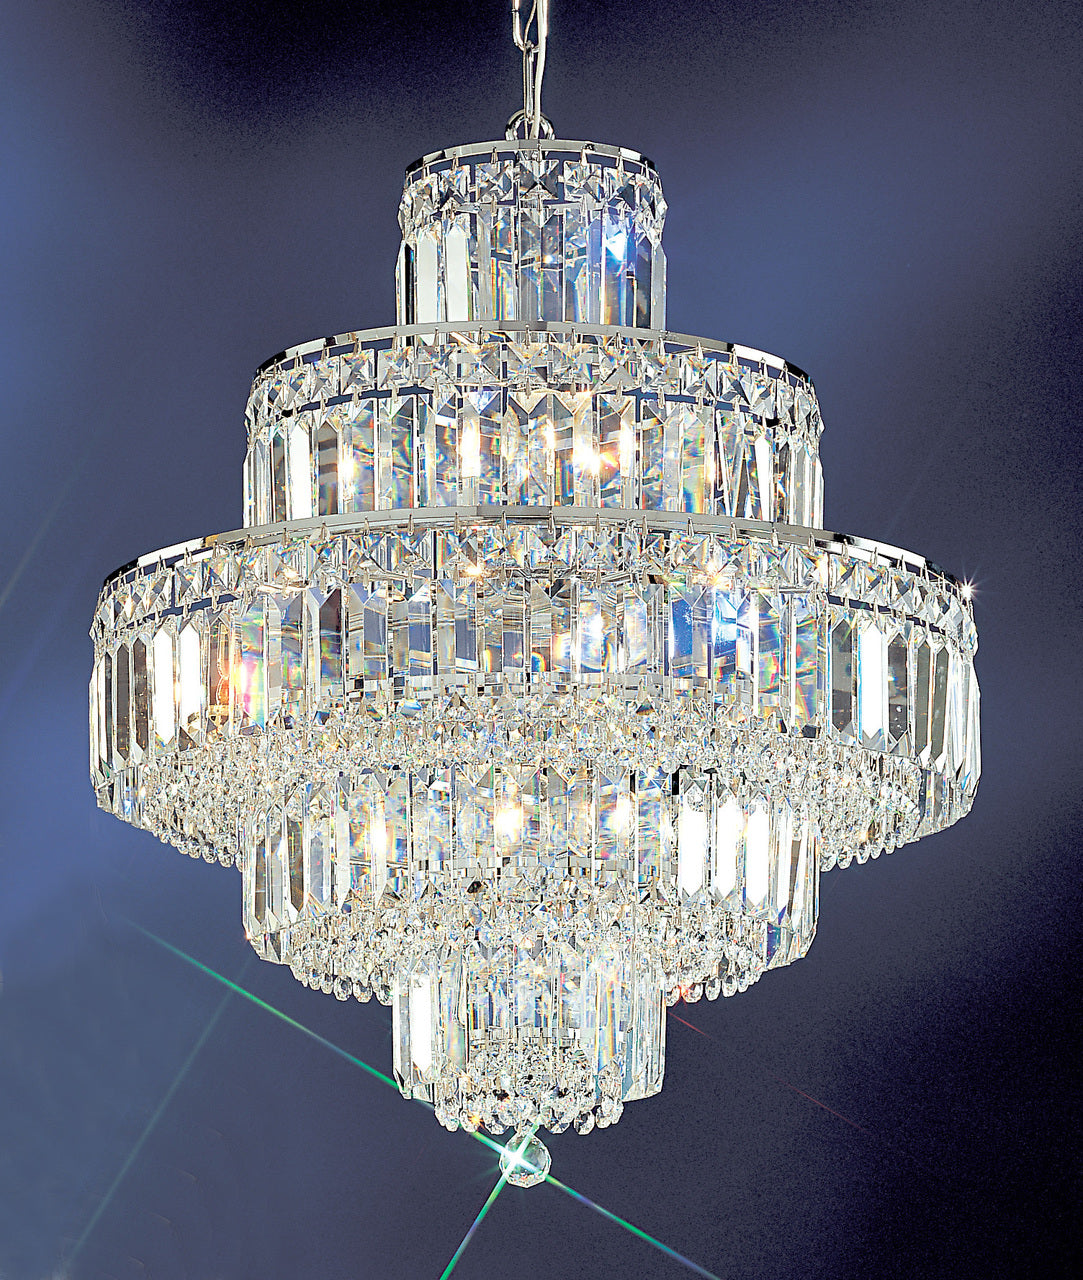 Classic Lighting 1601 CH S Ambassador Crystal Chandelier in Chrome